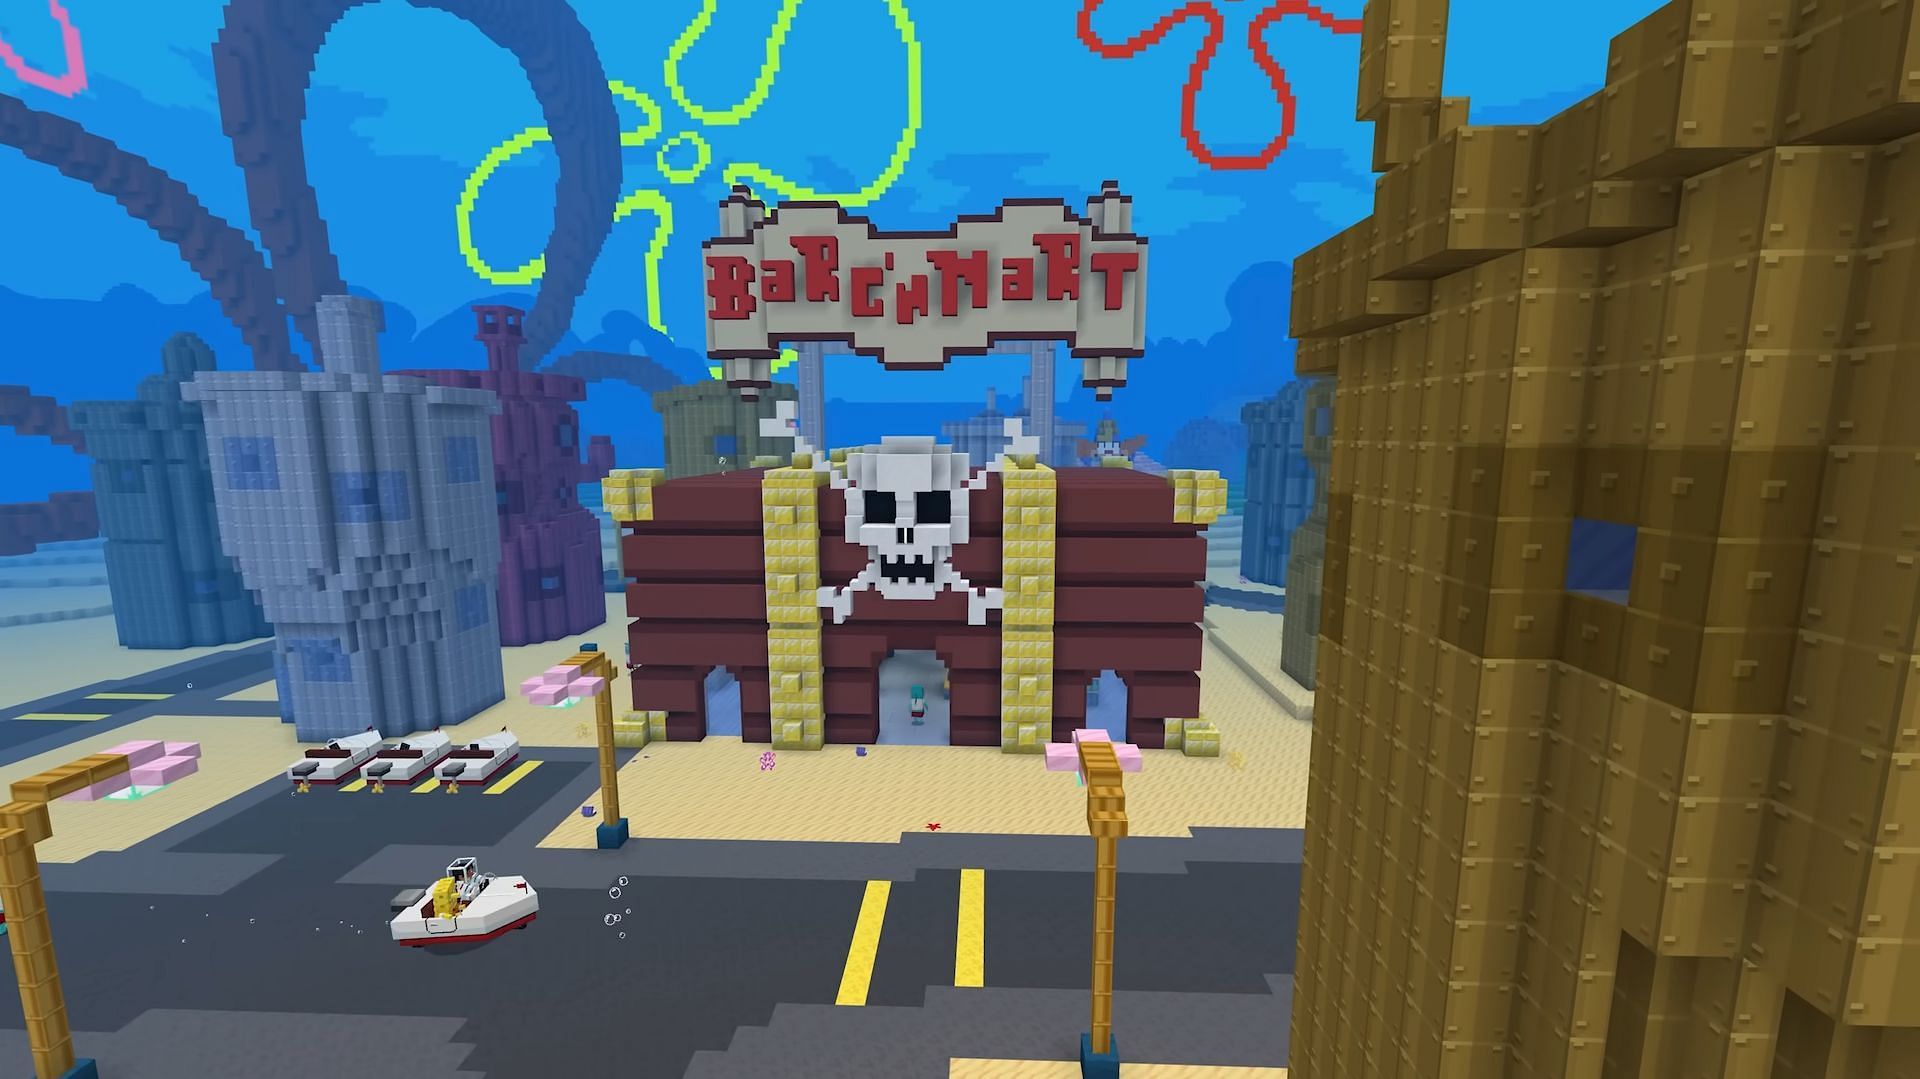 The Barg&#039;N-Mart is one of the many locations players can explore throughout Bikini Bottom (Image via Minecraft)